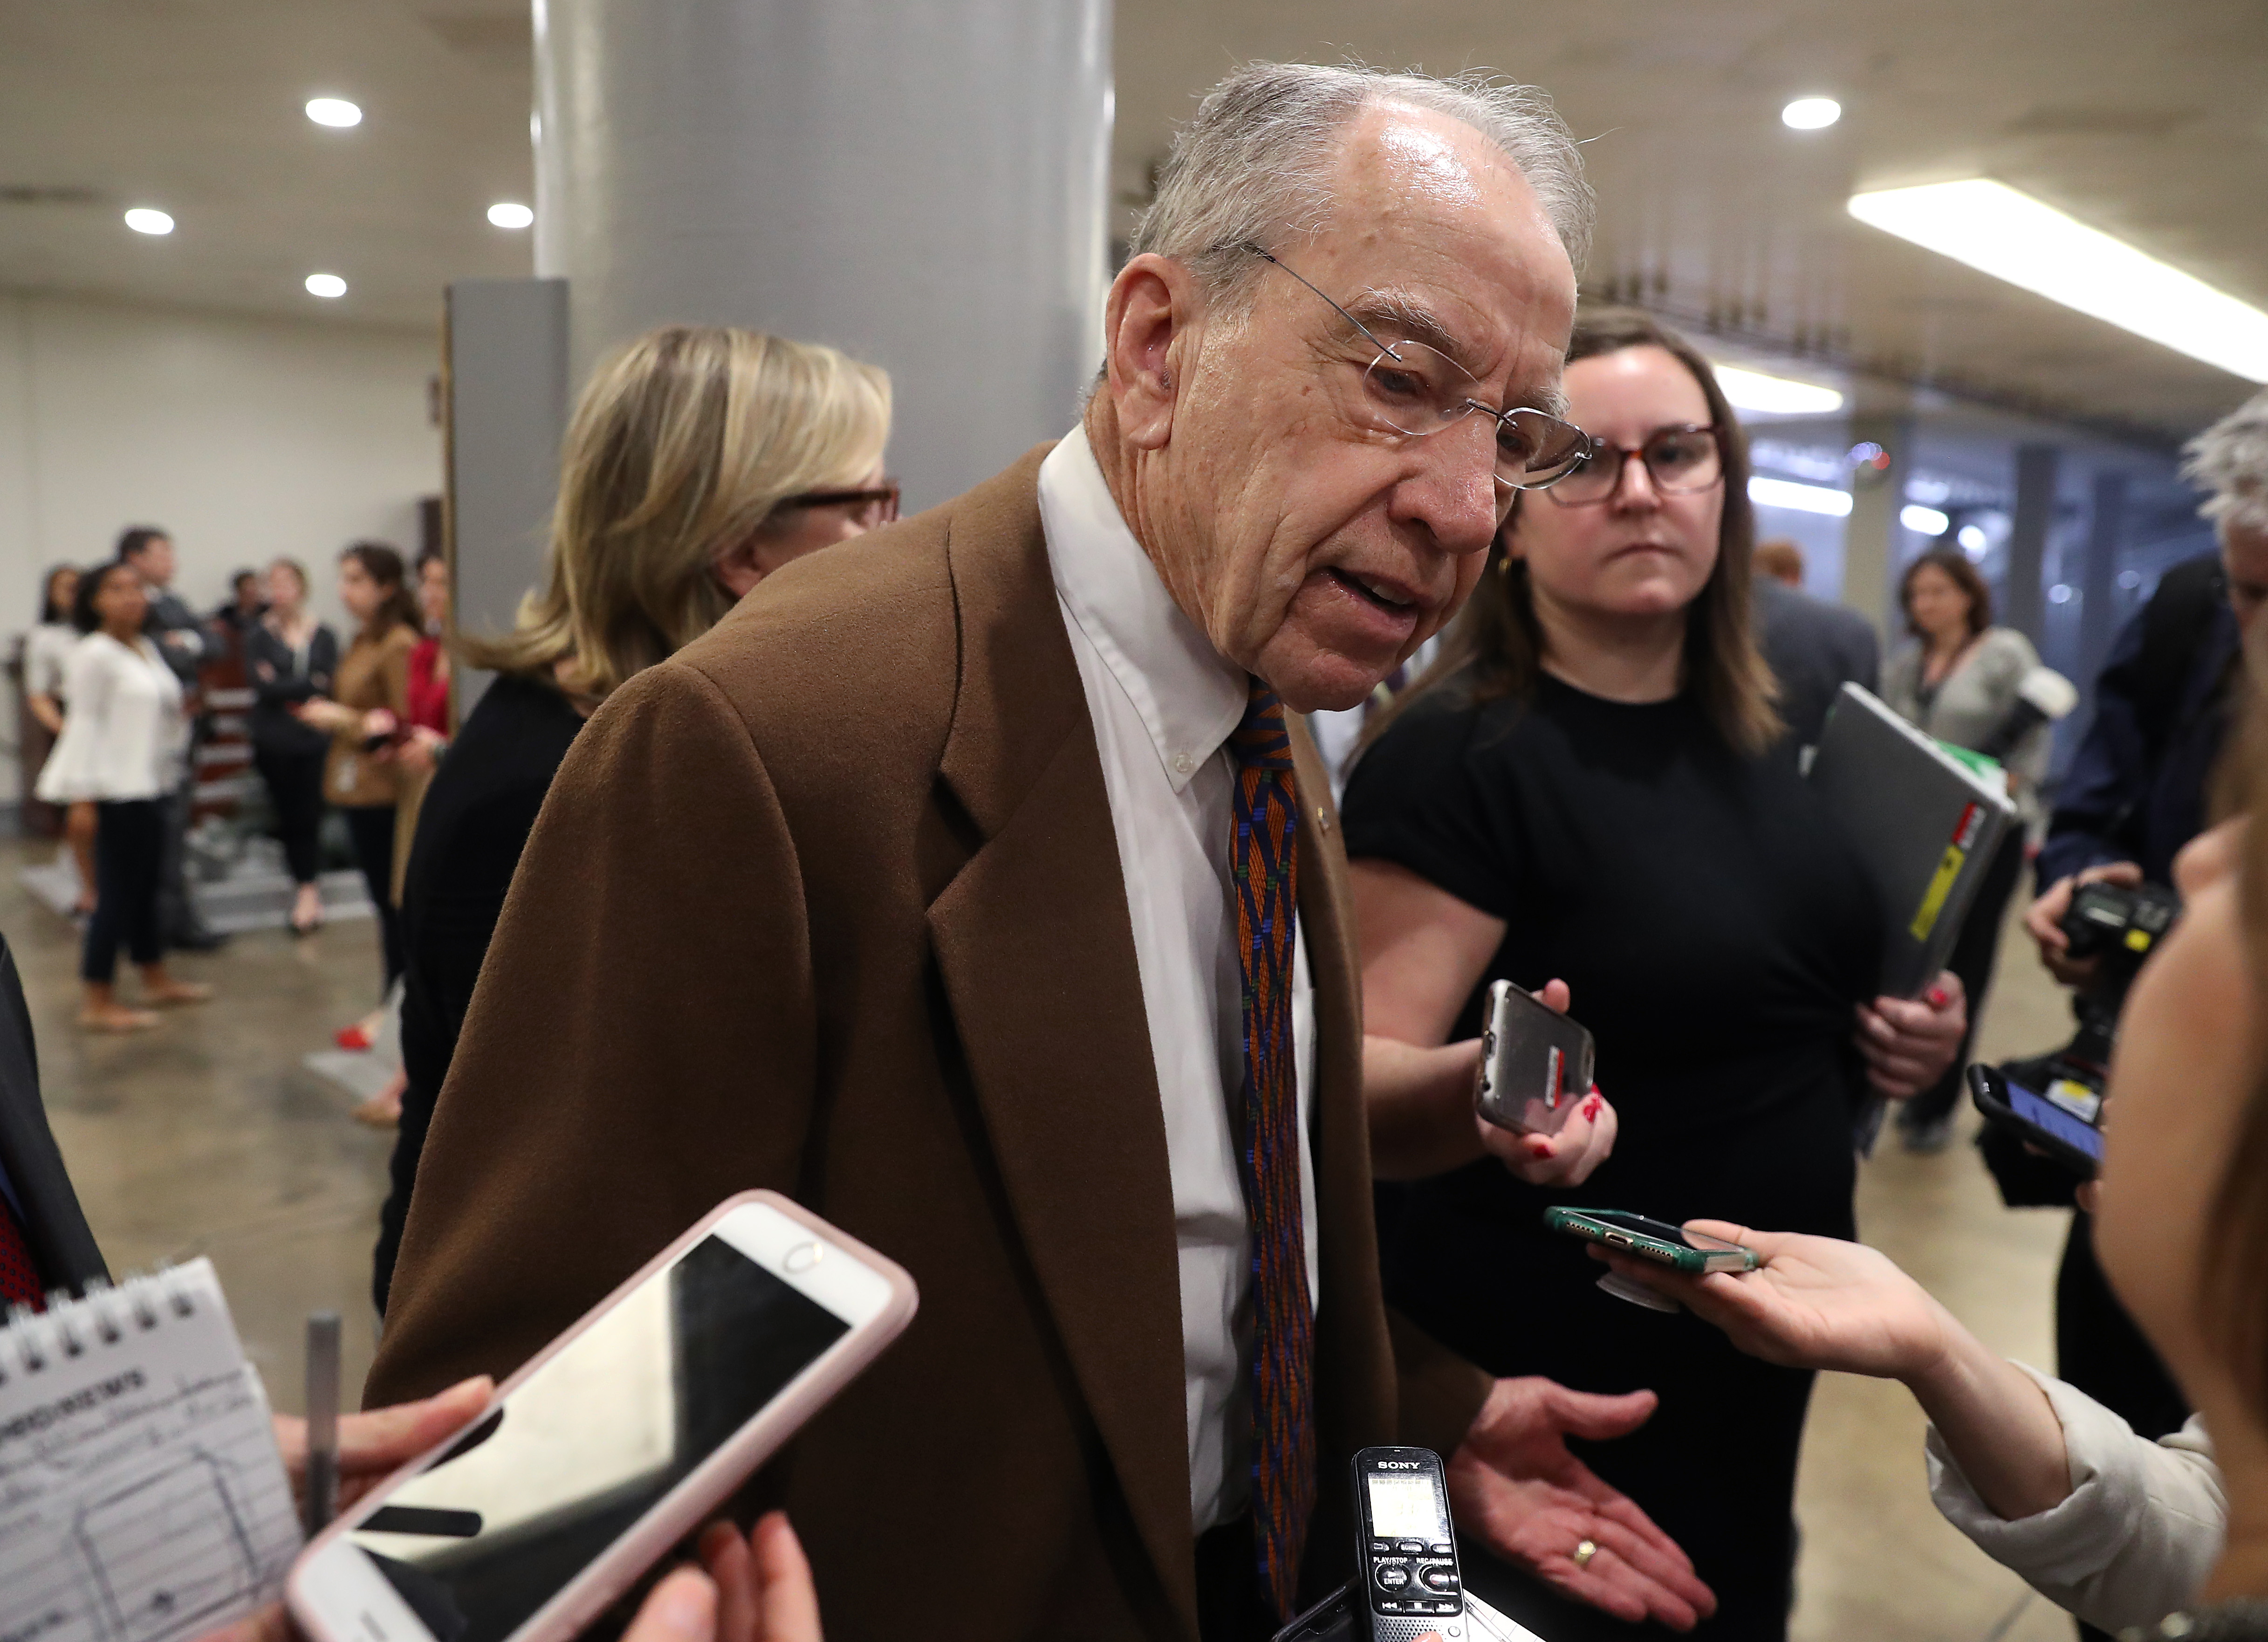 Sen. Chuck Grassley speaks to reporters after the Senate voted to overturn the President's national emergency border declaration, at the U.S. Capitol on March 14, 2019 in Washington, DC. (Photo by Mark Wilson/Getty Images)